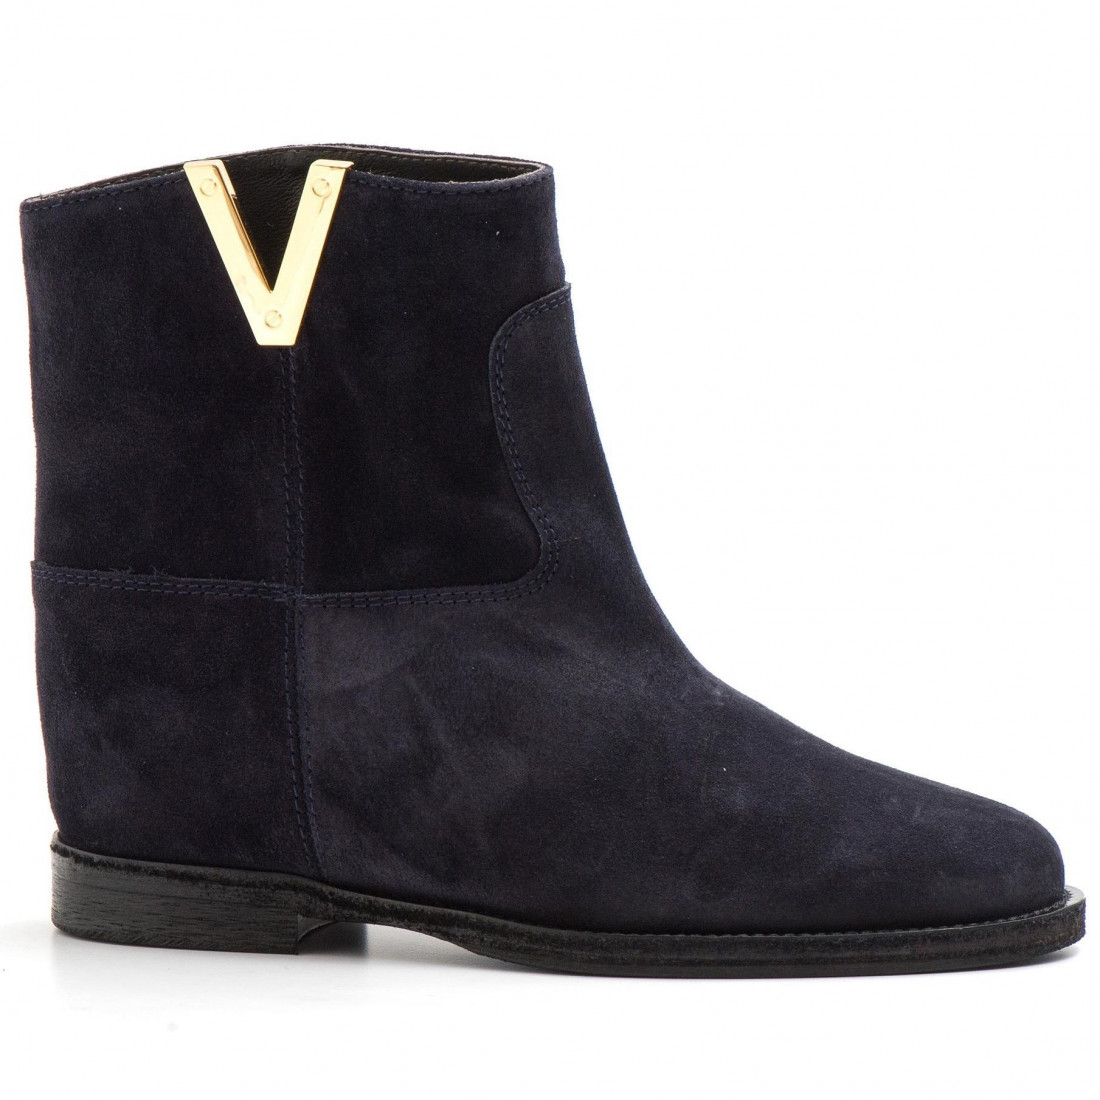 Ankle boots in blue suede with internal wedge